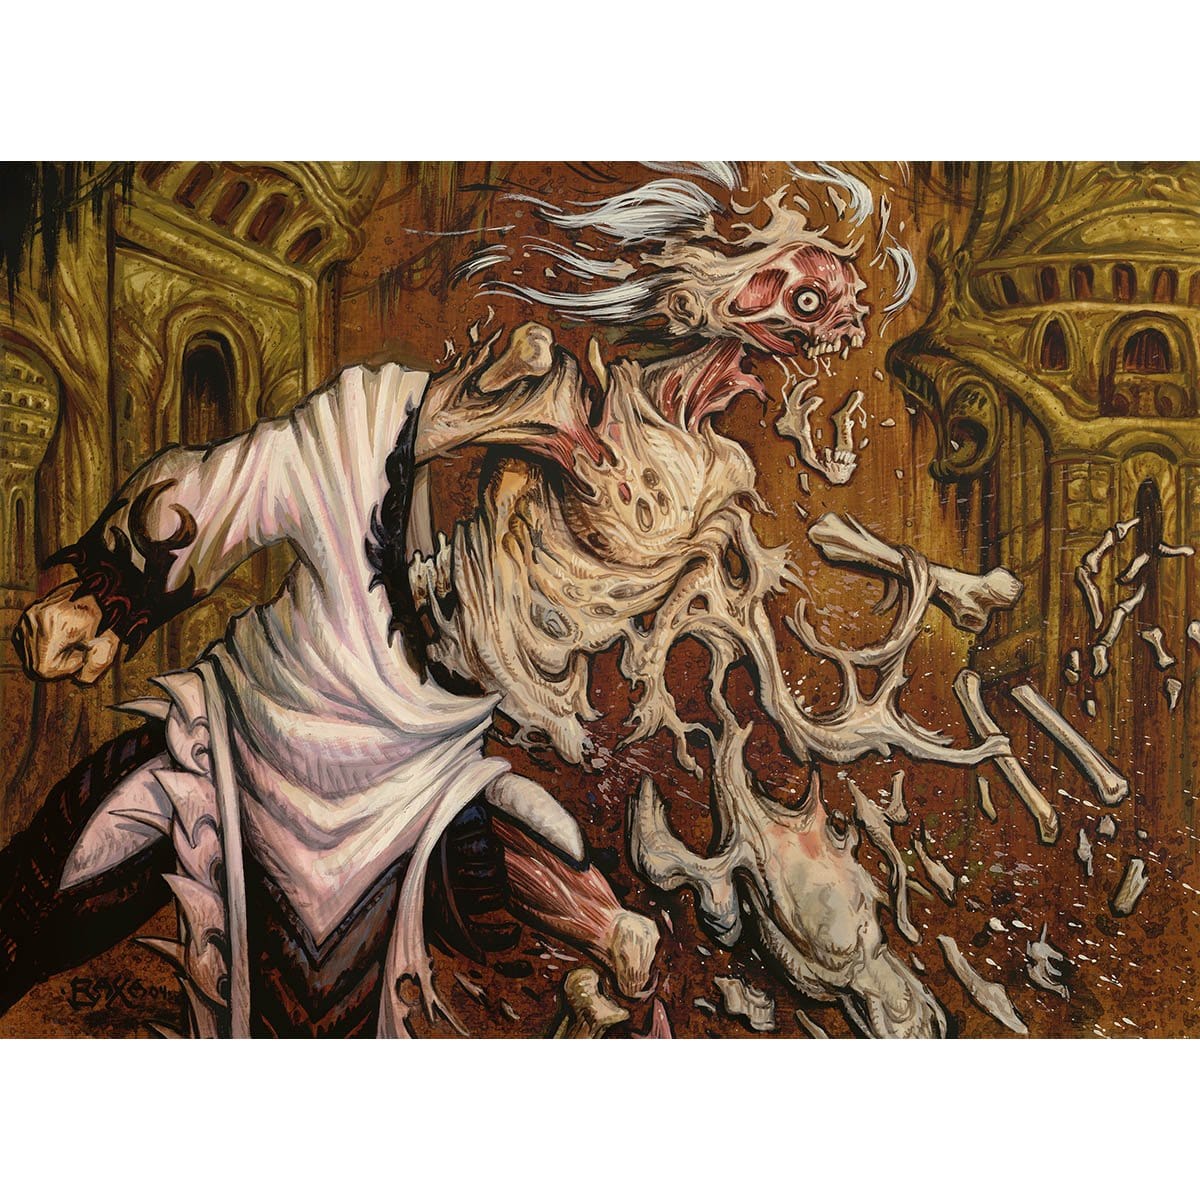 Rise from the Grave Print - Print - Original Magic Art - Accessories for Magic the Gathering and other card games